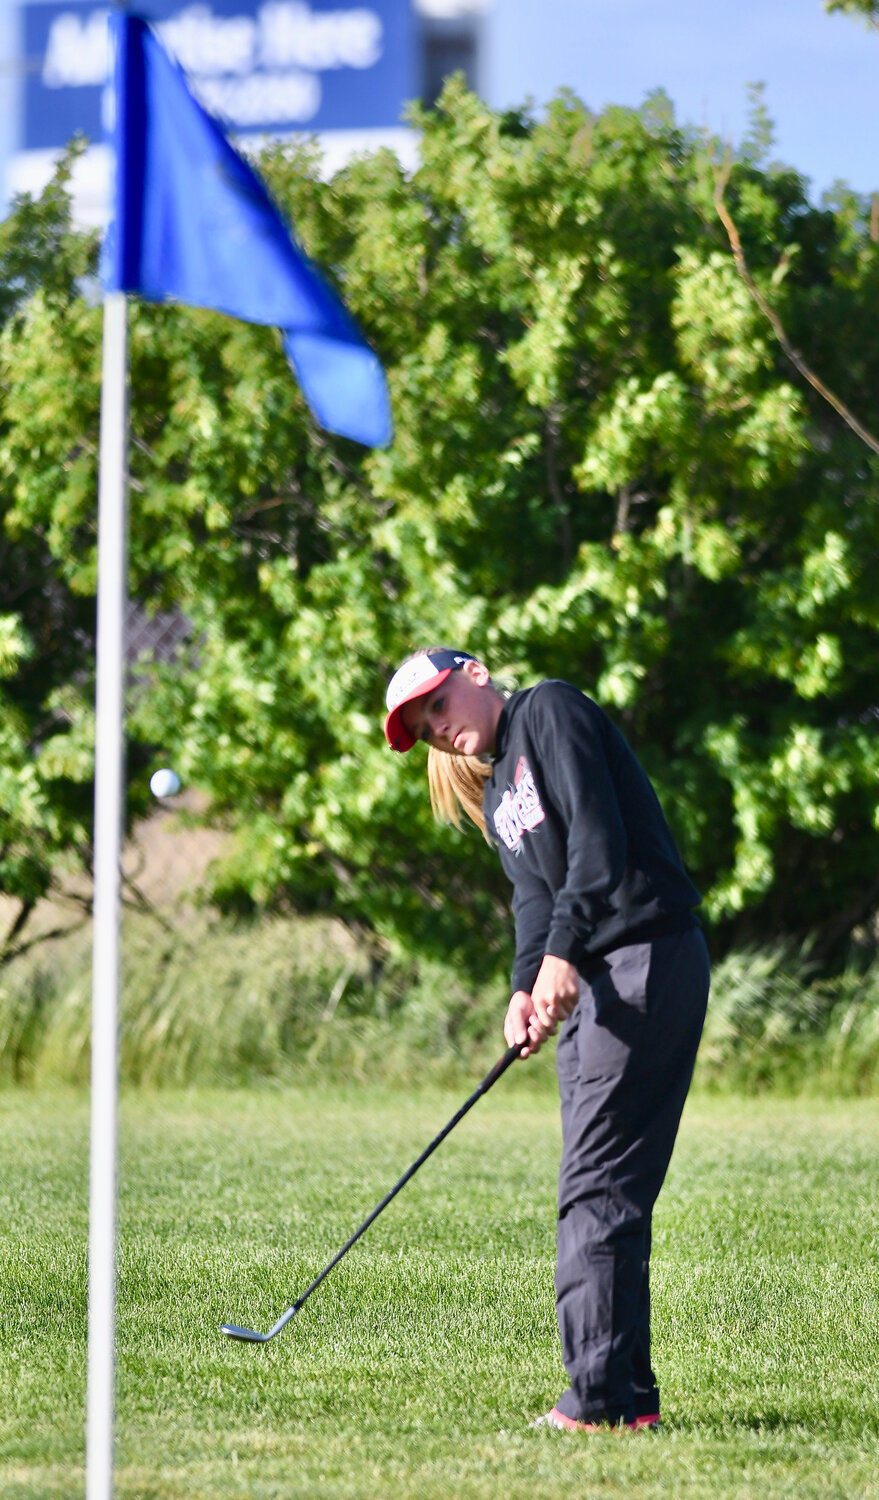 Kemmerer golfer Tazlyn Wagner takes aim at the flag from just off the green Saturday during the second round of the WSGA Amateur Championship, held at Purple Sage Golf Course in Evanston.